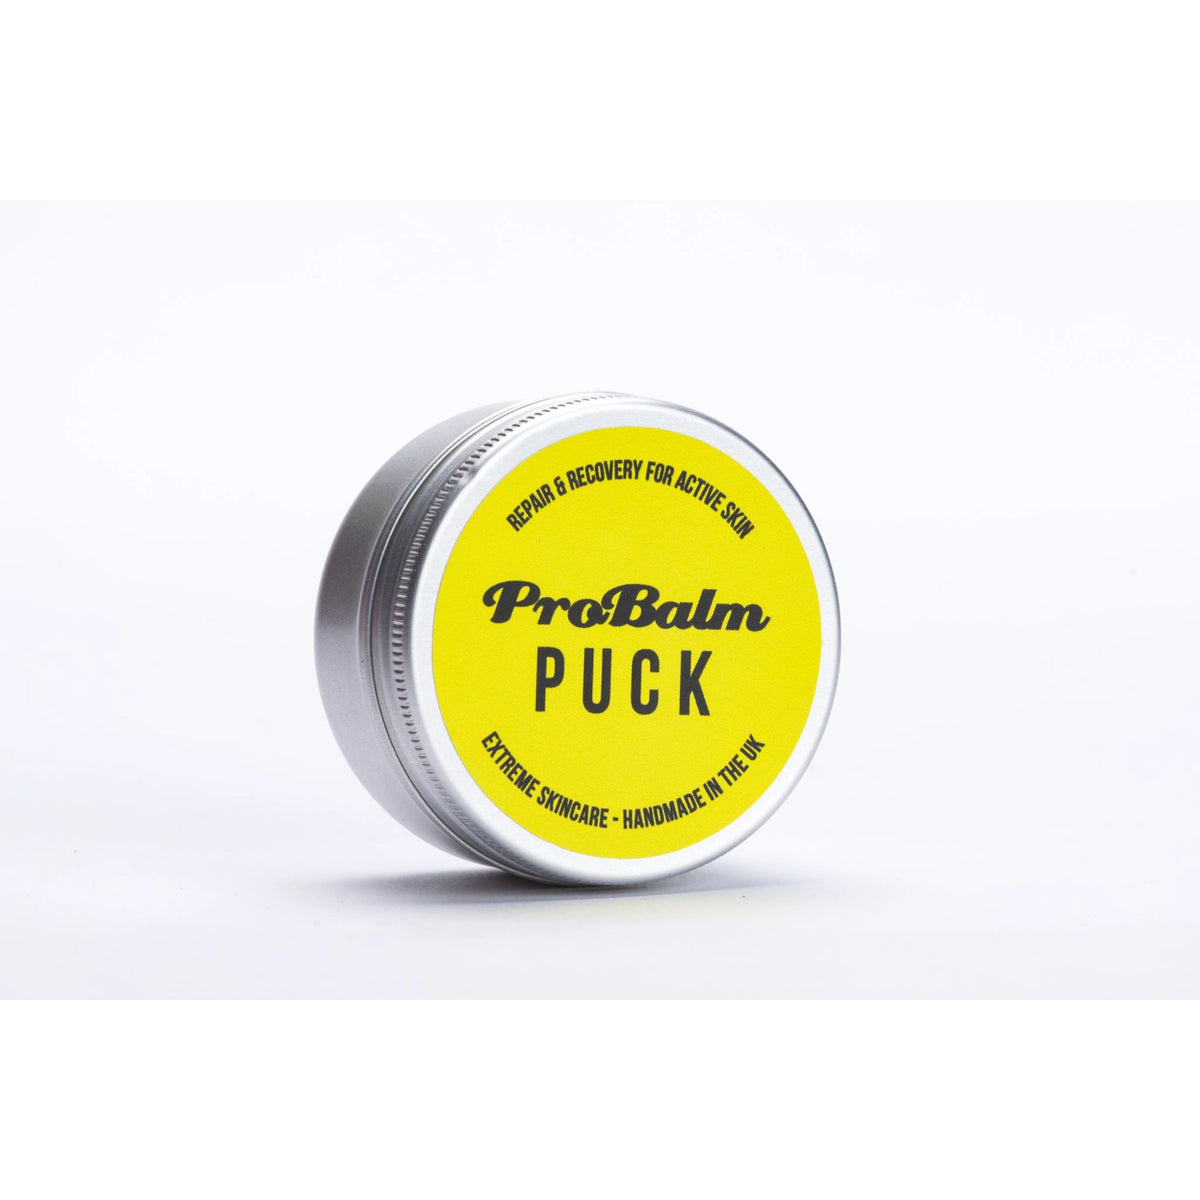 ProBalm Puck 14g tin with yellow label